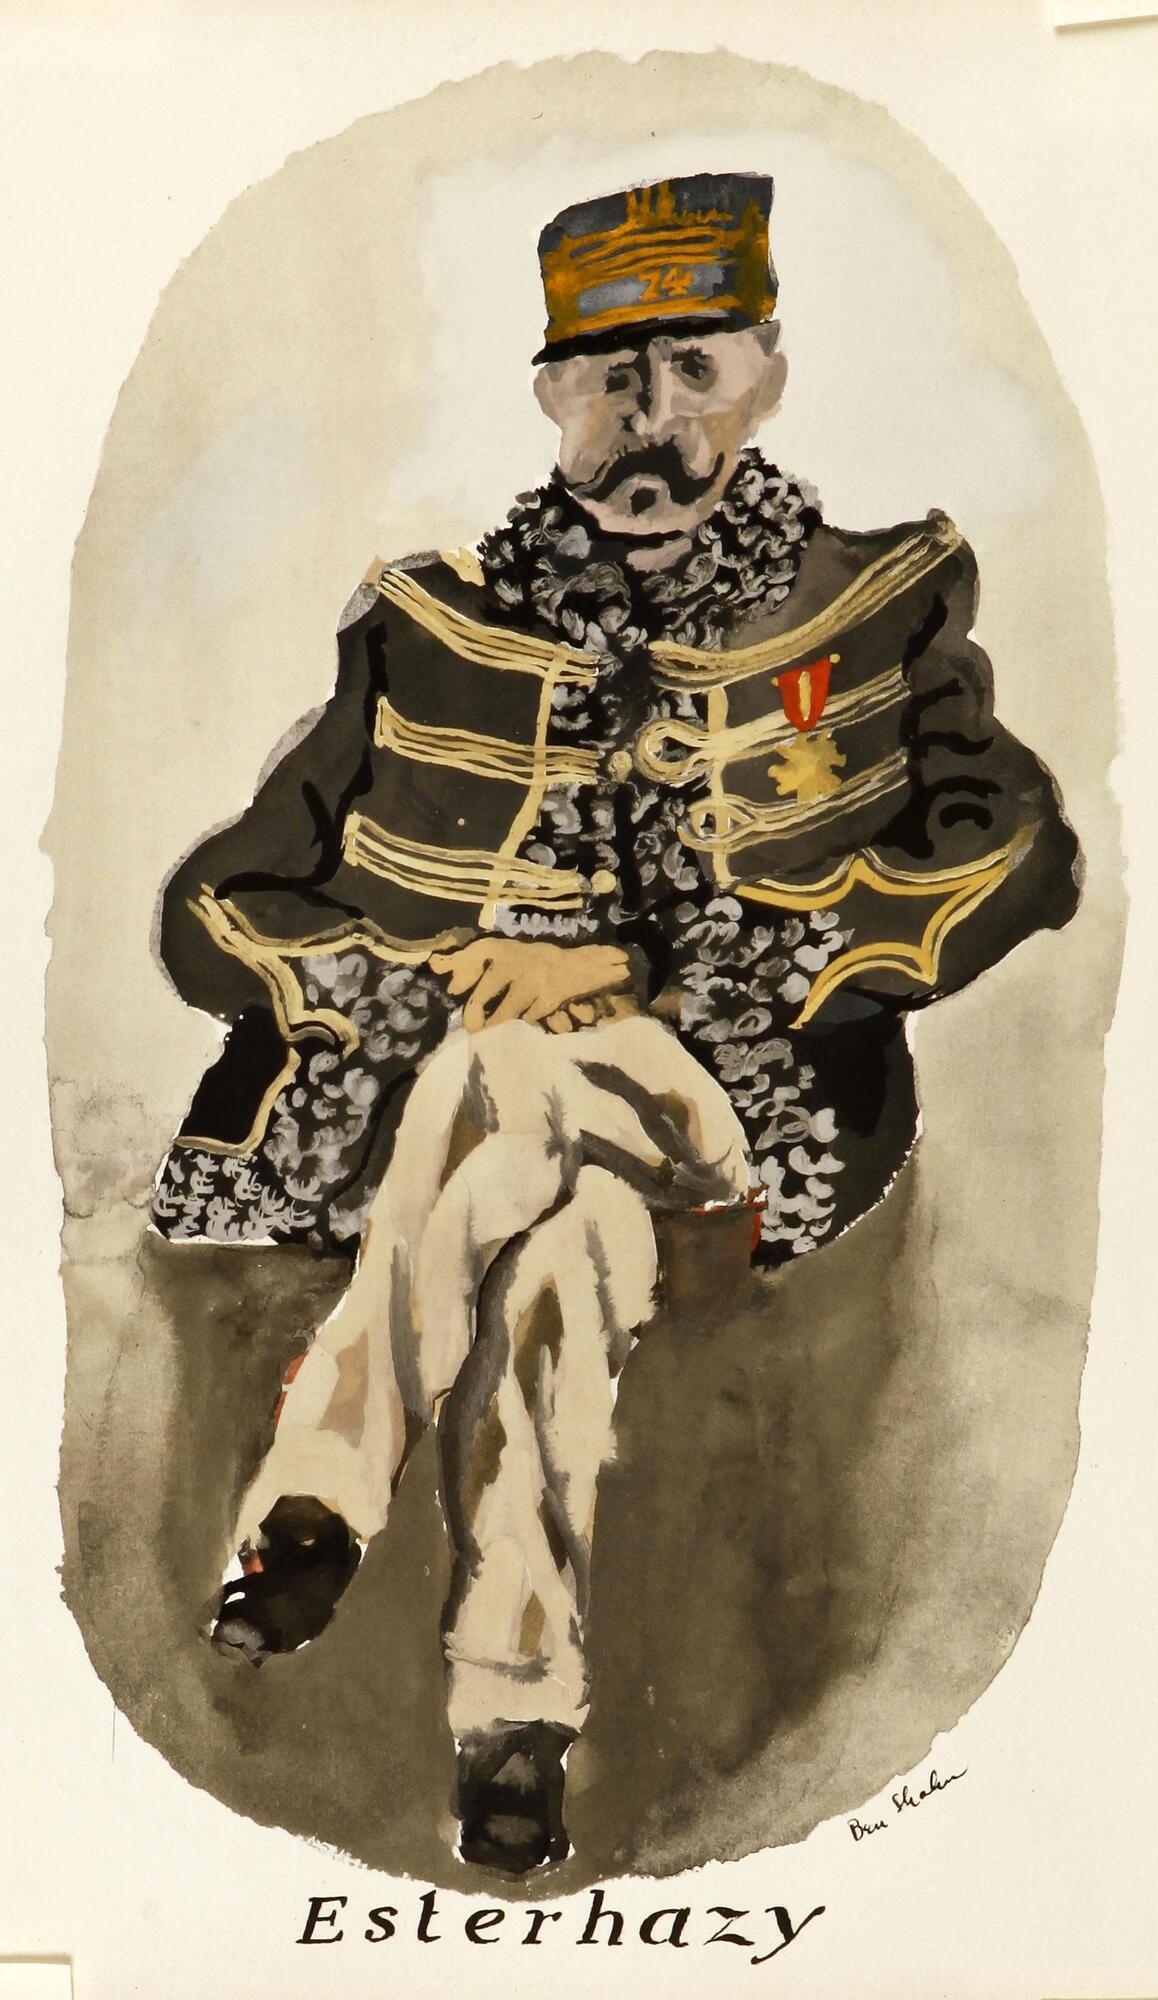 A portrait of a man sitting down. Shown in military dress, he sits with his legs crossed and is painted from the front.  His coat is decorated with a medal and embellished with gold and fur trimmings.  Although he is painted seated, there is nothing but a dark shadow beneath him.  Underneath the portrait reads "Esterhazy".